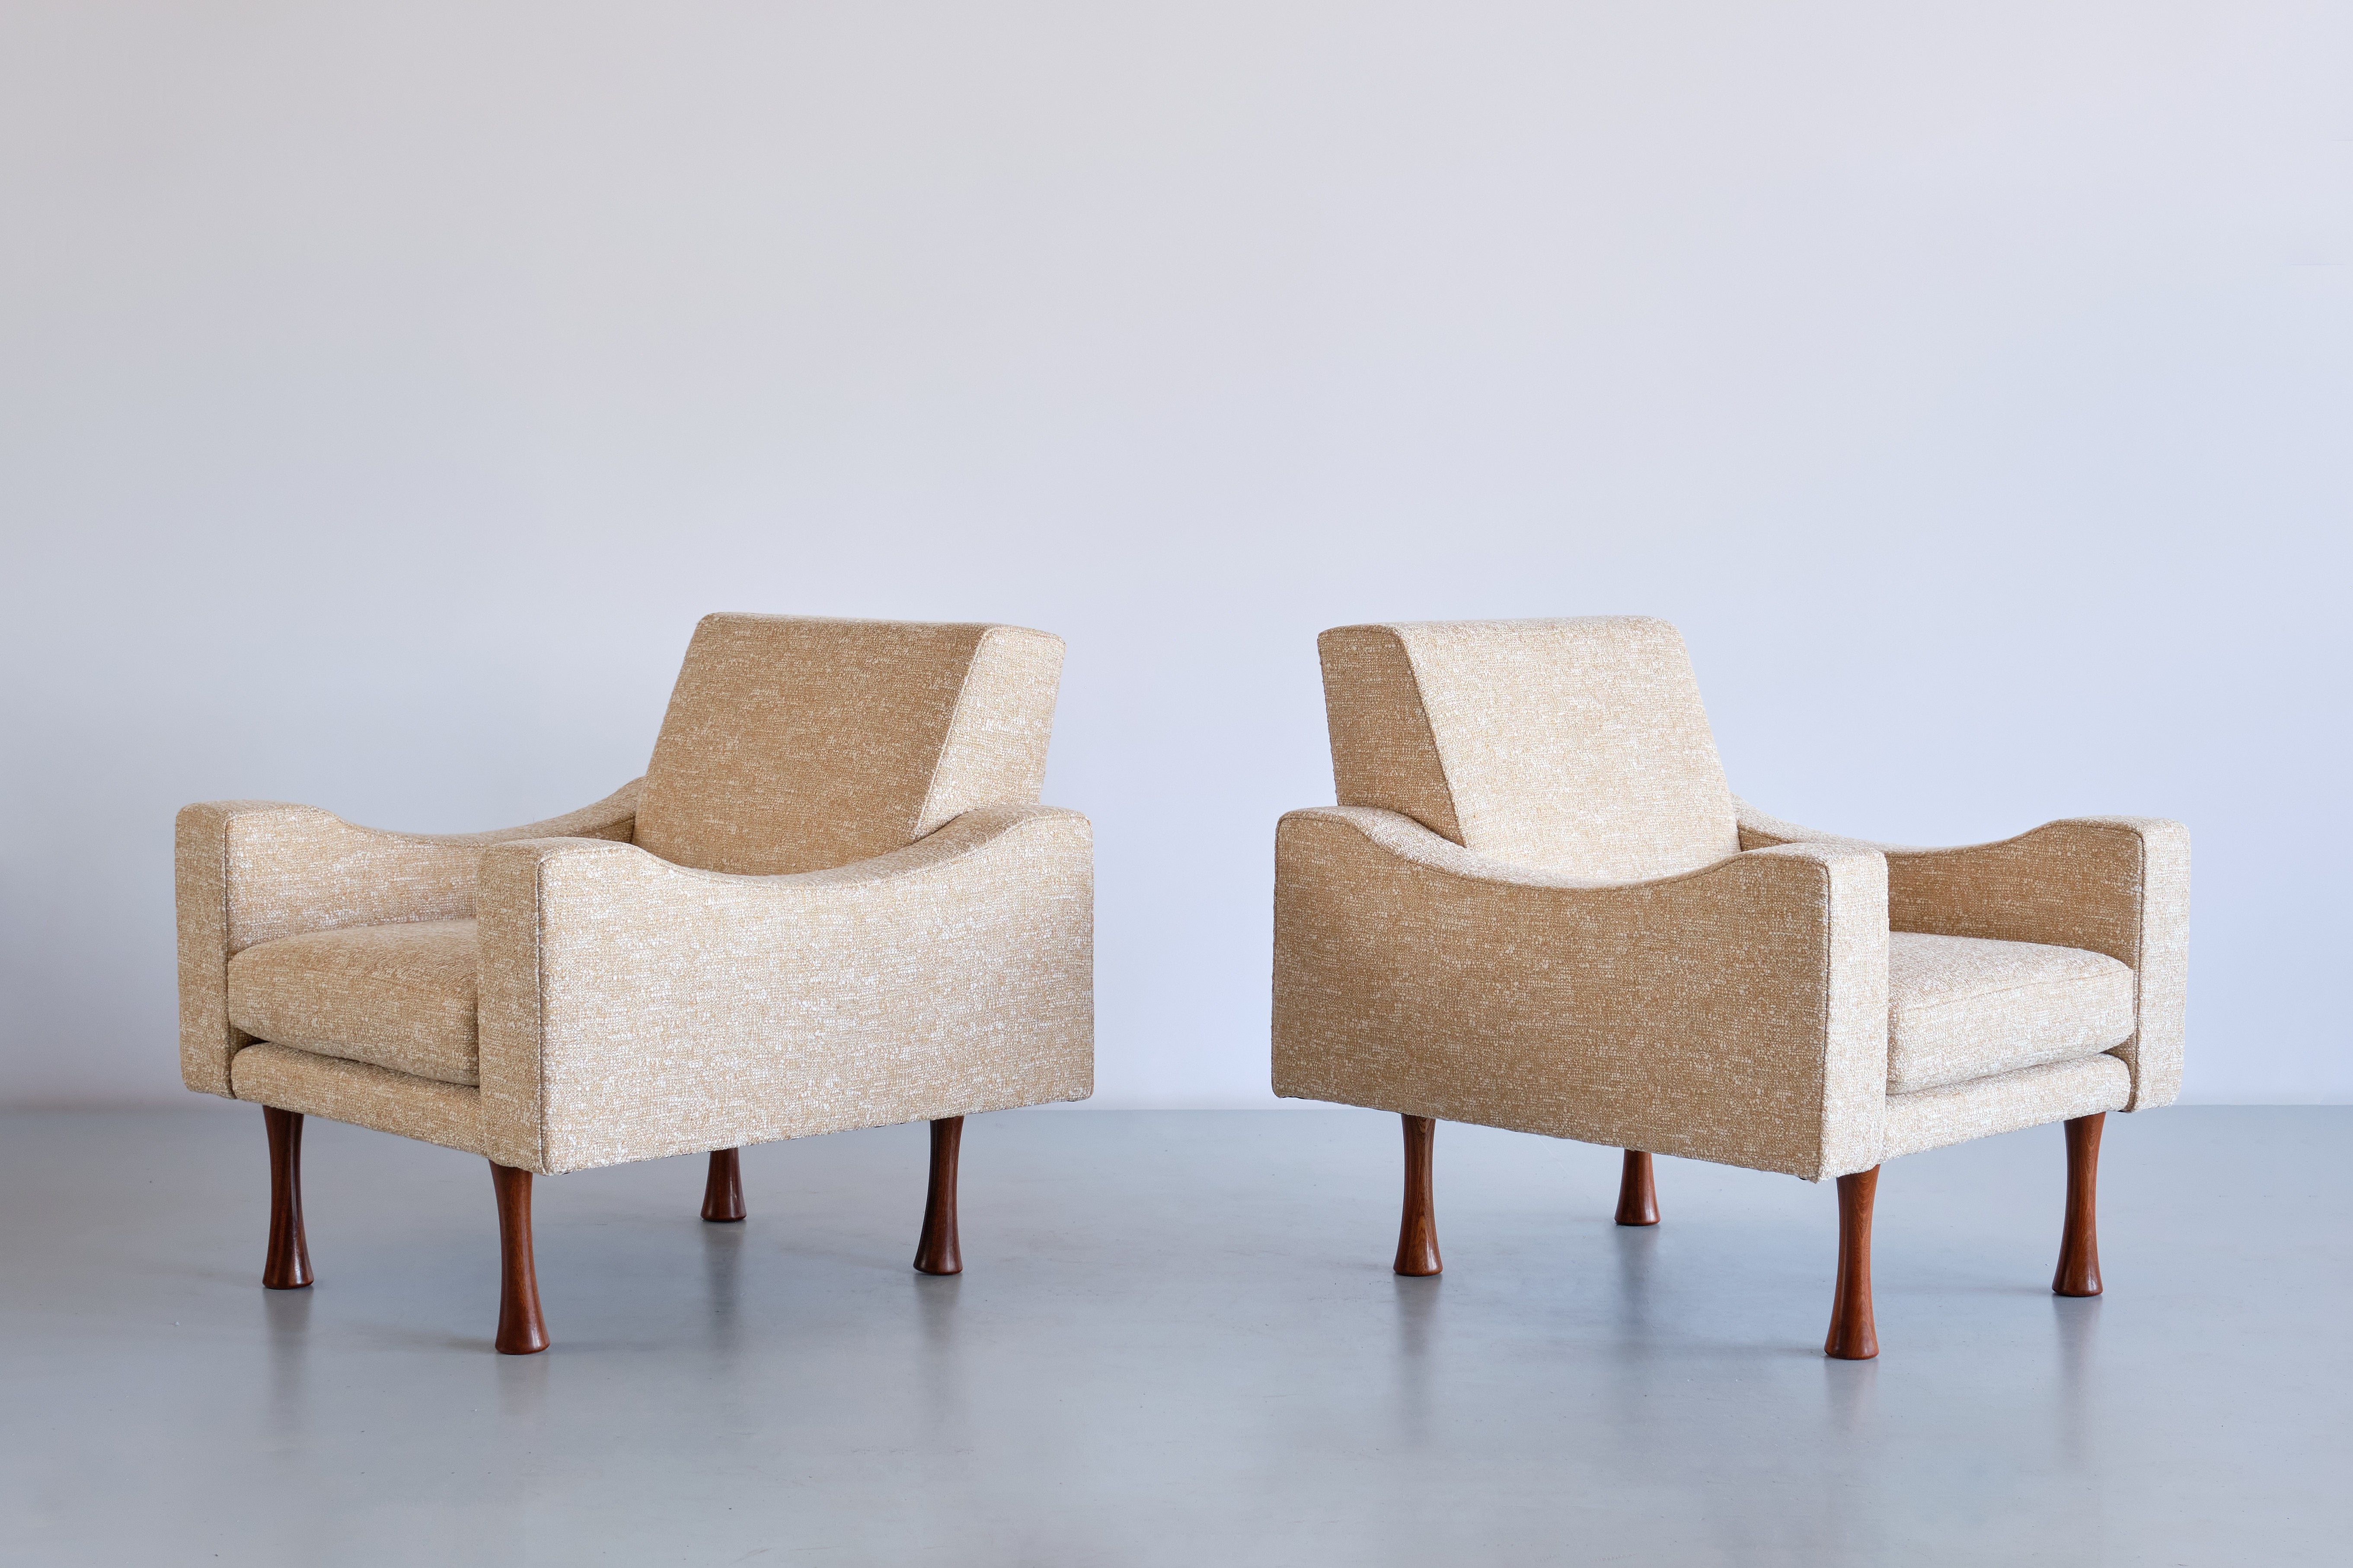 This very rare pair of armchairs was designed by Angelo Mangiarotti and produced by the Italian manufacturer La Sorgente dei Mobili in the early 1970s. The design is marked by the geometric shapes of the upholstered frame combined with a curved